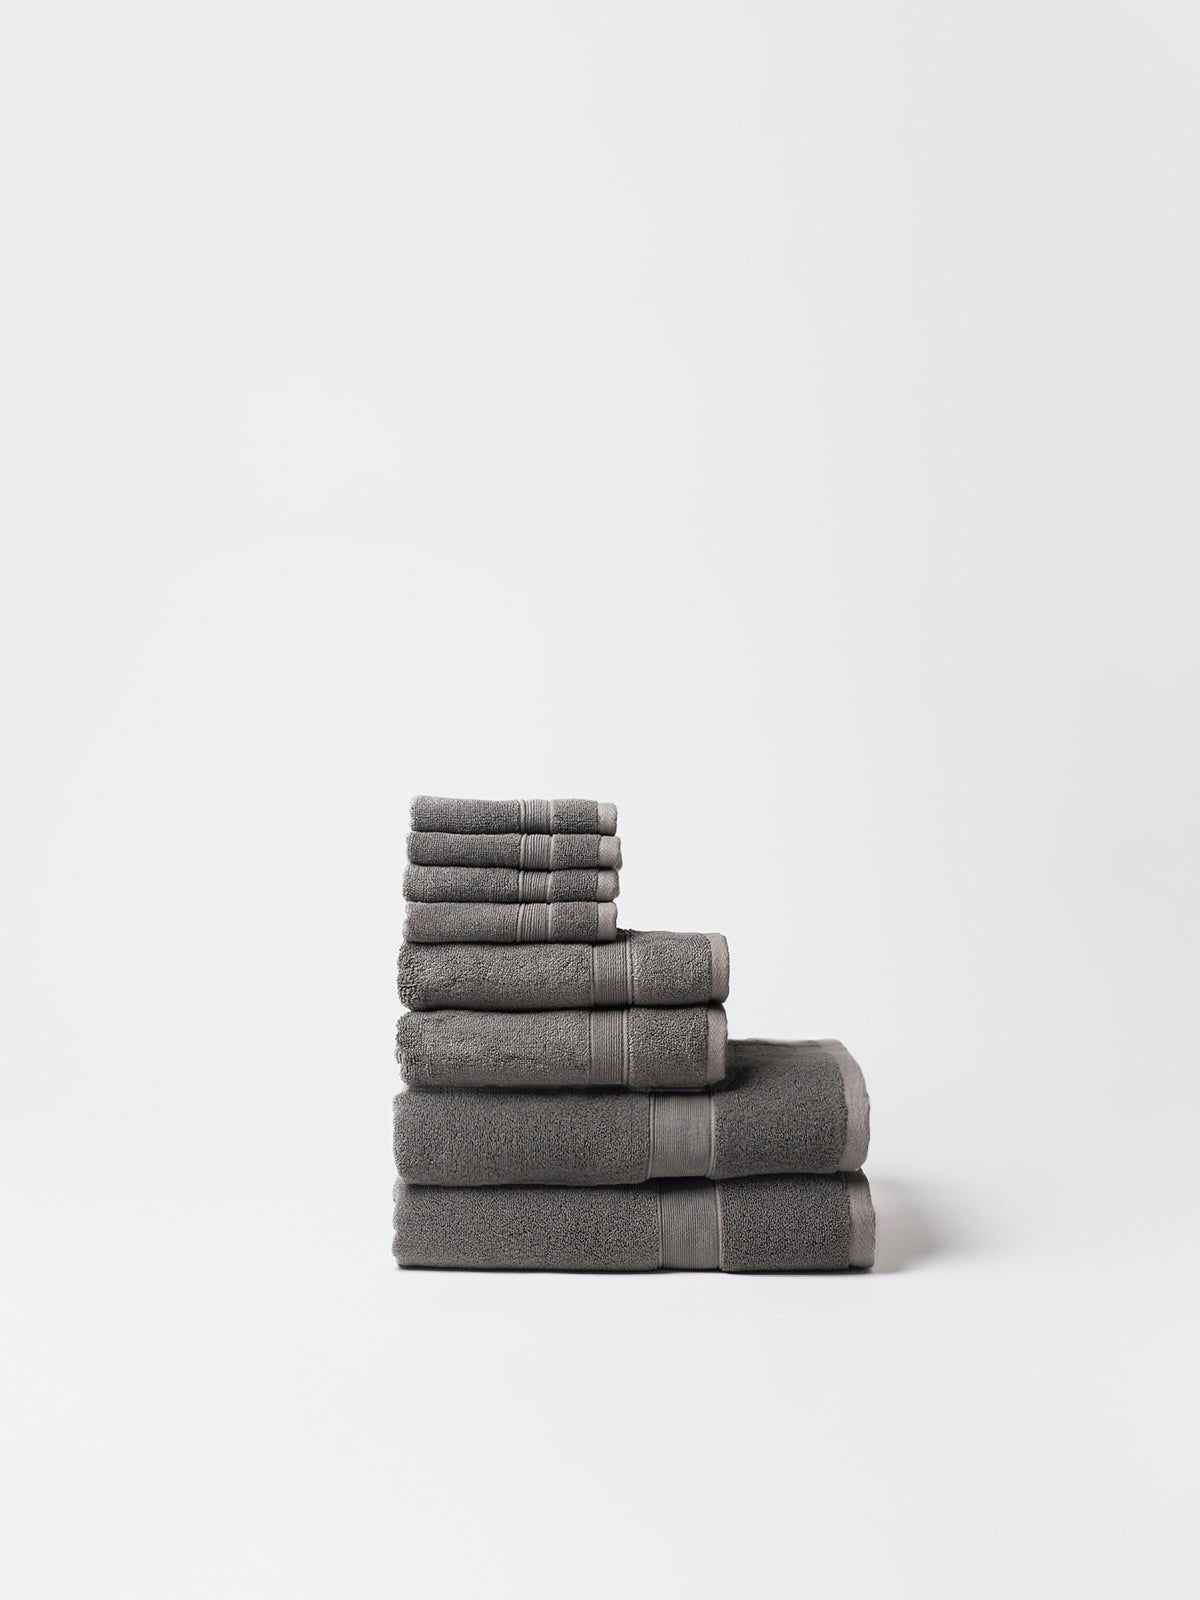 Charcoal luxe bath towel set folded with white background 